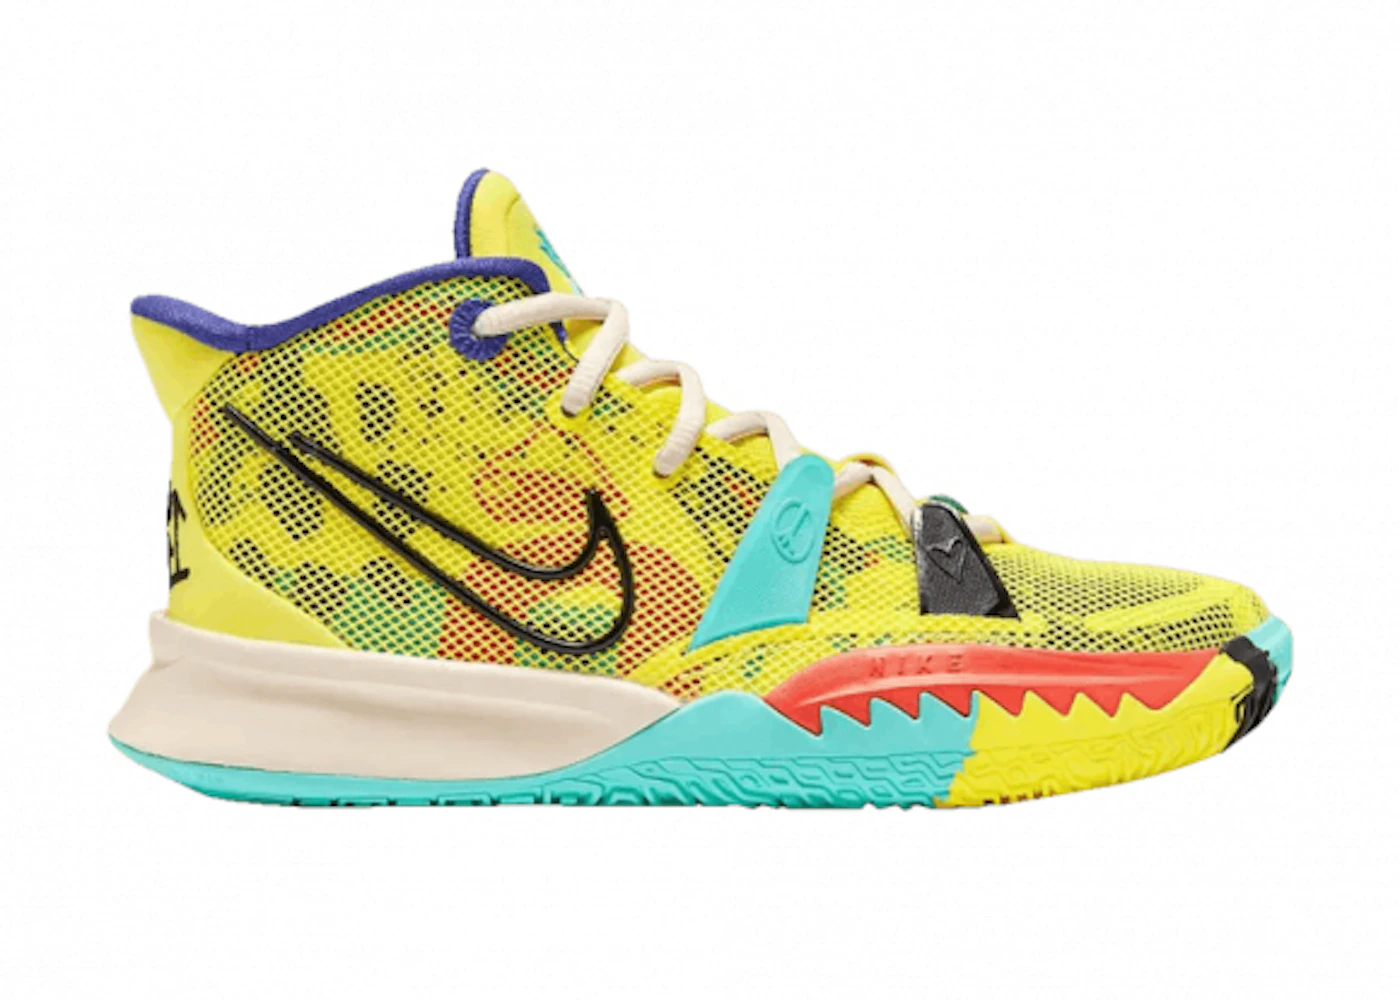 Trueno cráter Civil Nike Kyrie 7 1 World 1 People Electric Yellow (GS) - CT4080-700 - ES